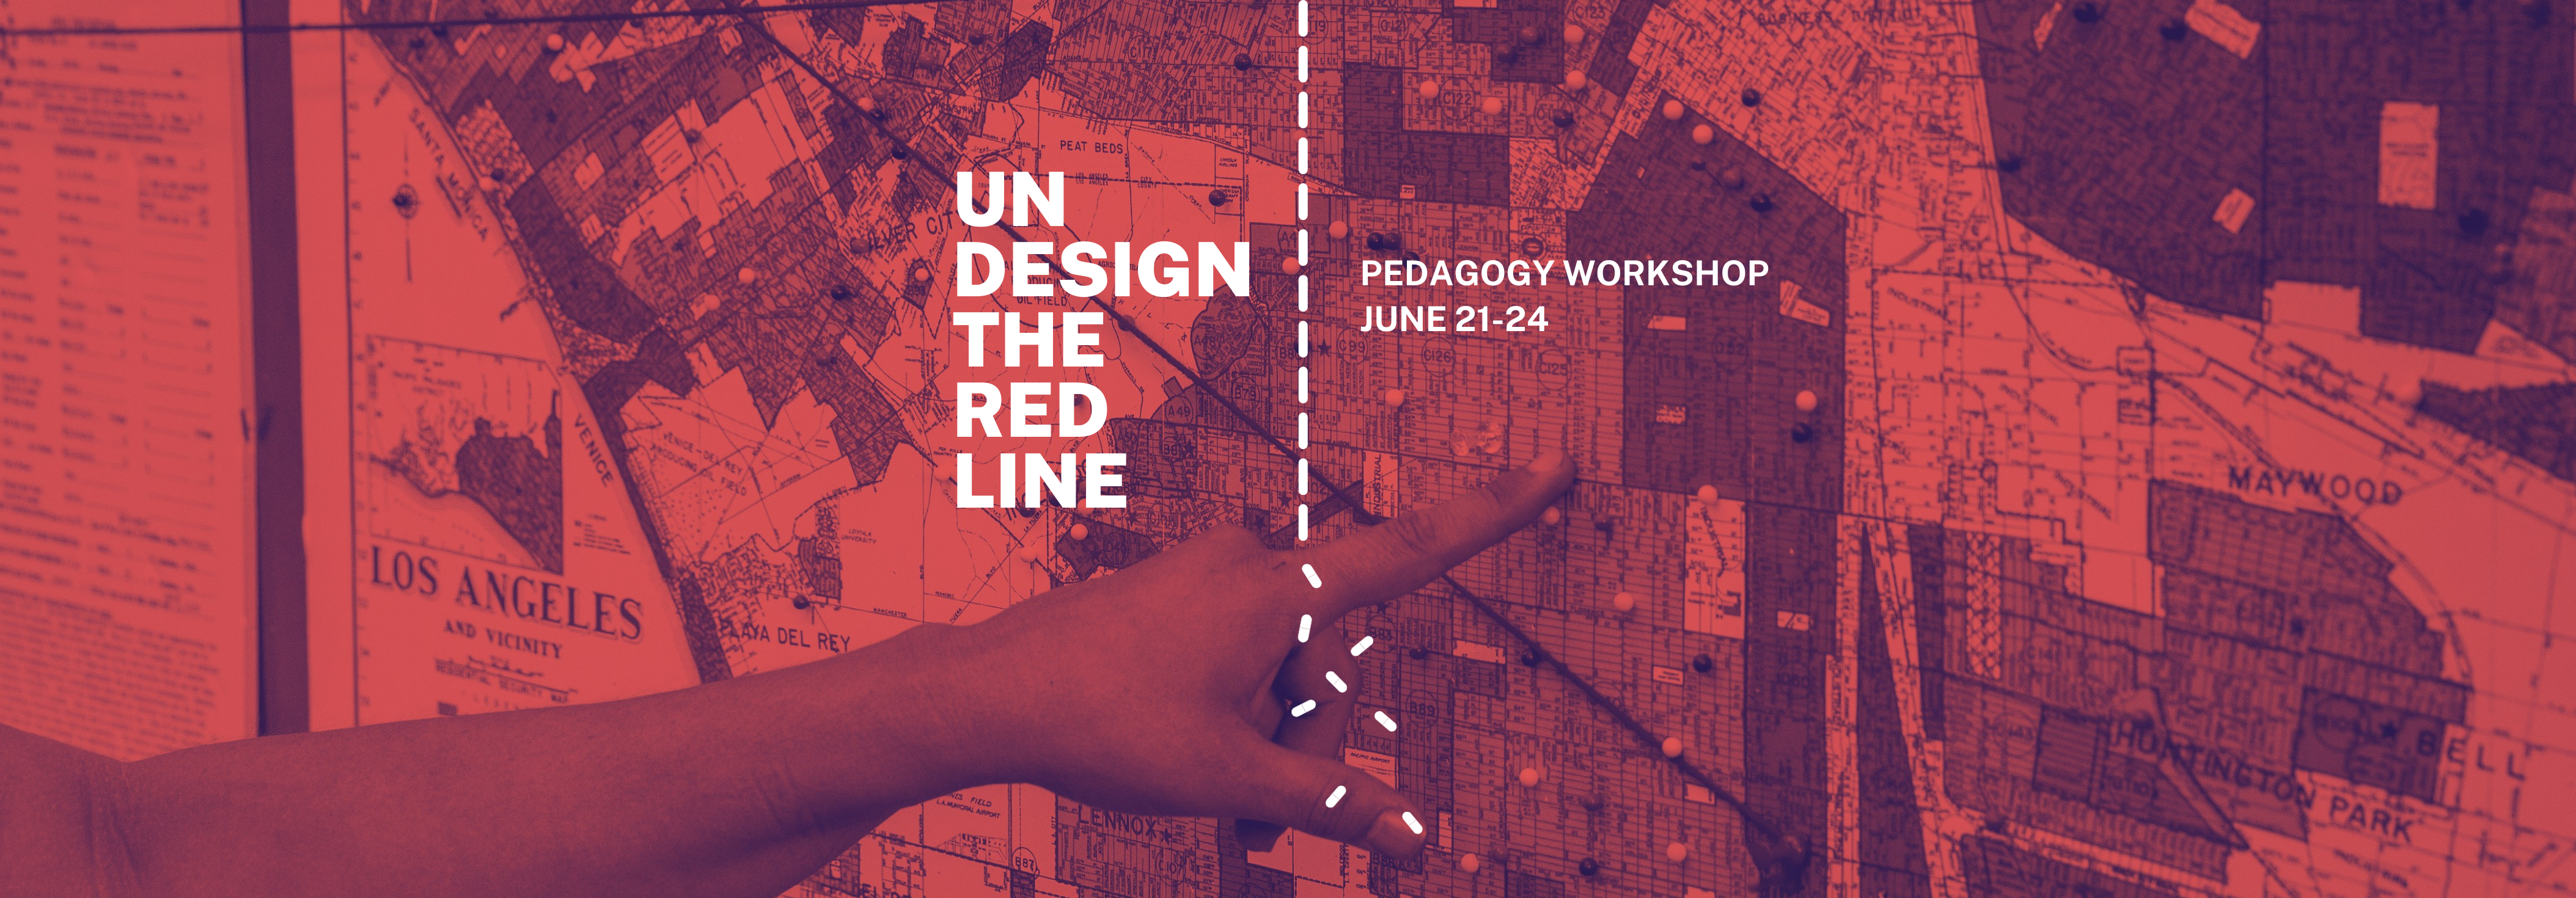 Hand pointing to a spot on a map with text "Undesign the Redline" layered on top